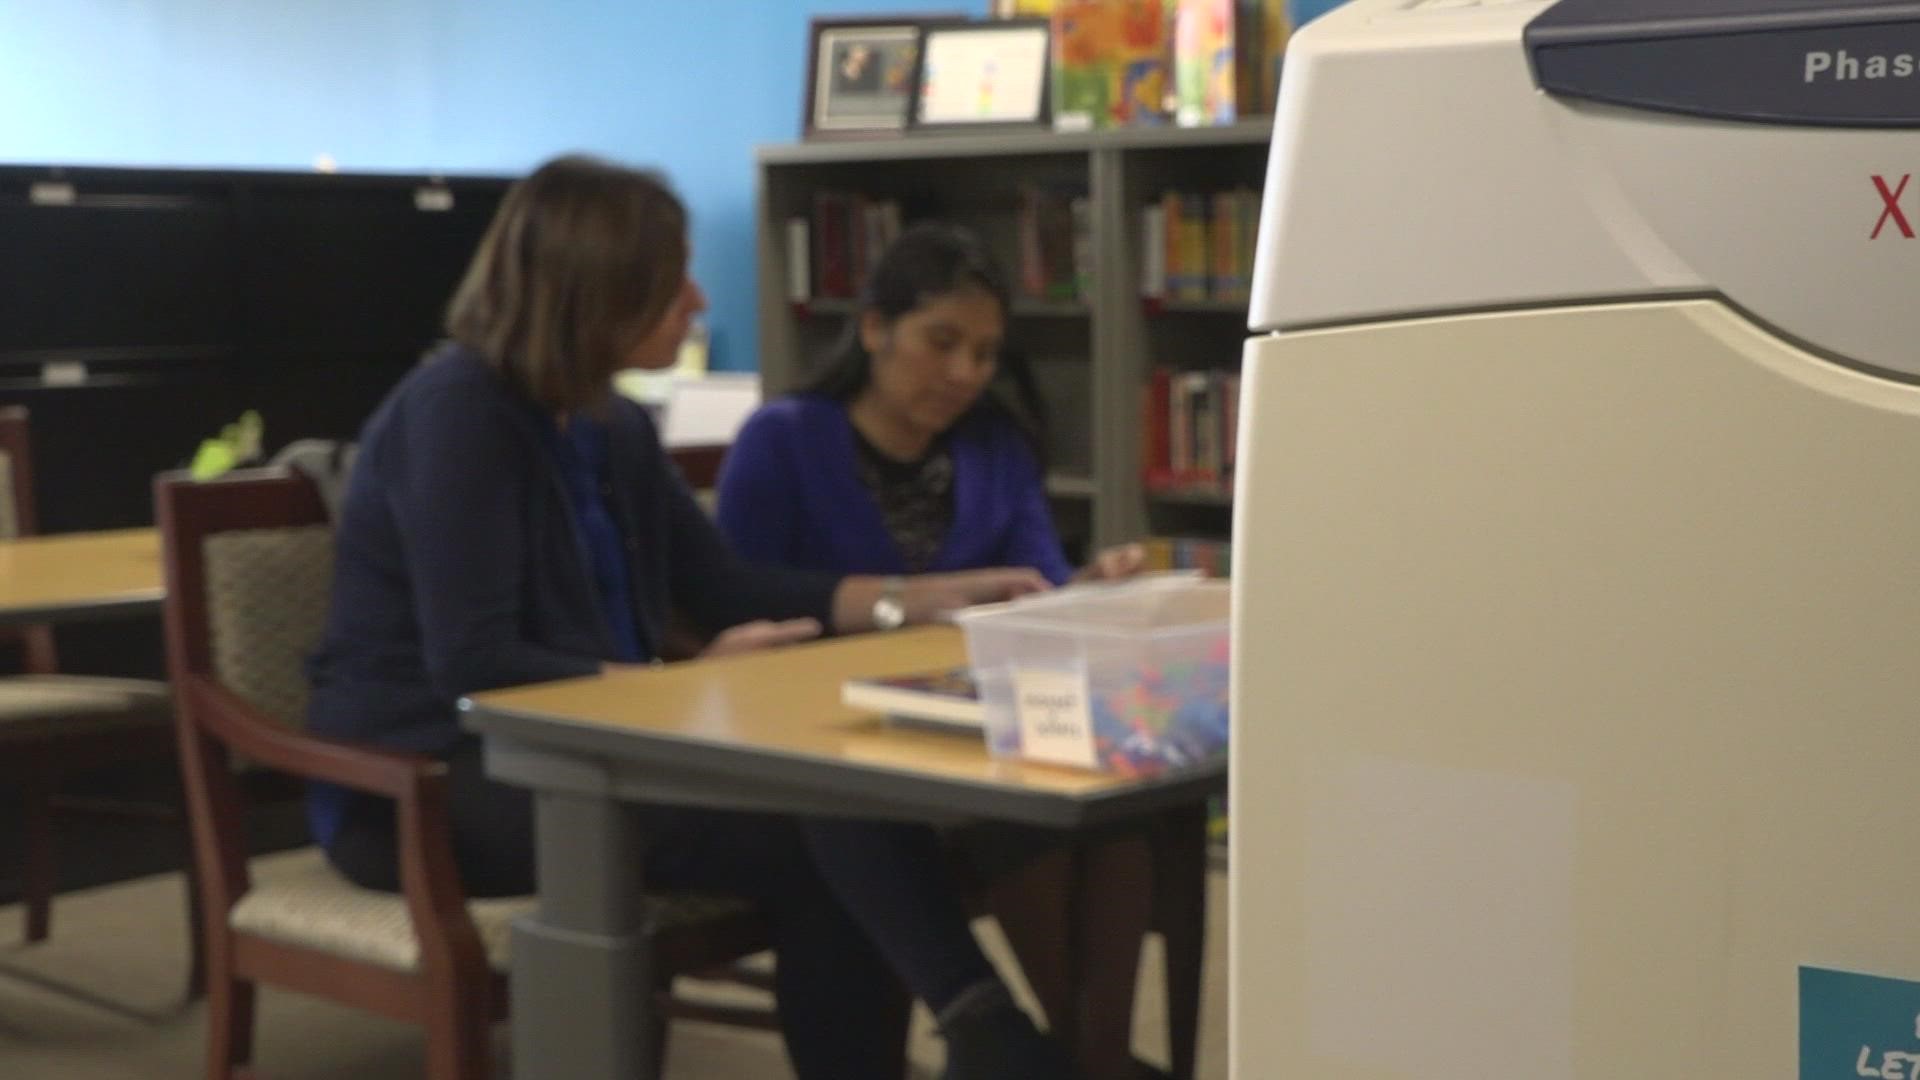 The Literacy Center of West Michigan helps adults and families develop reading, writing and communication skills.